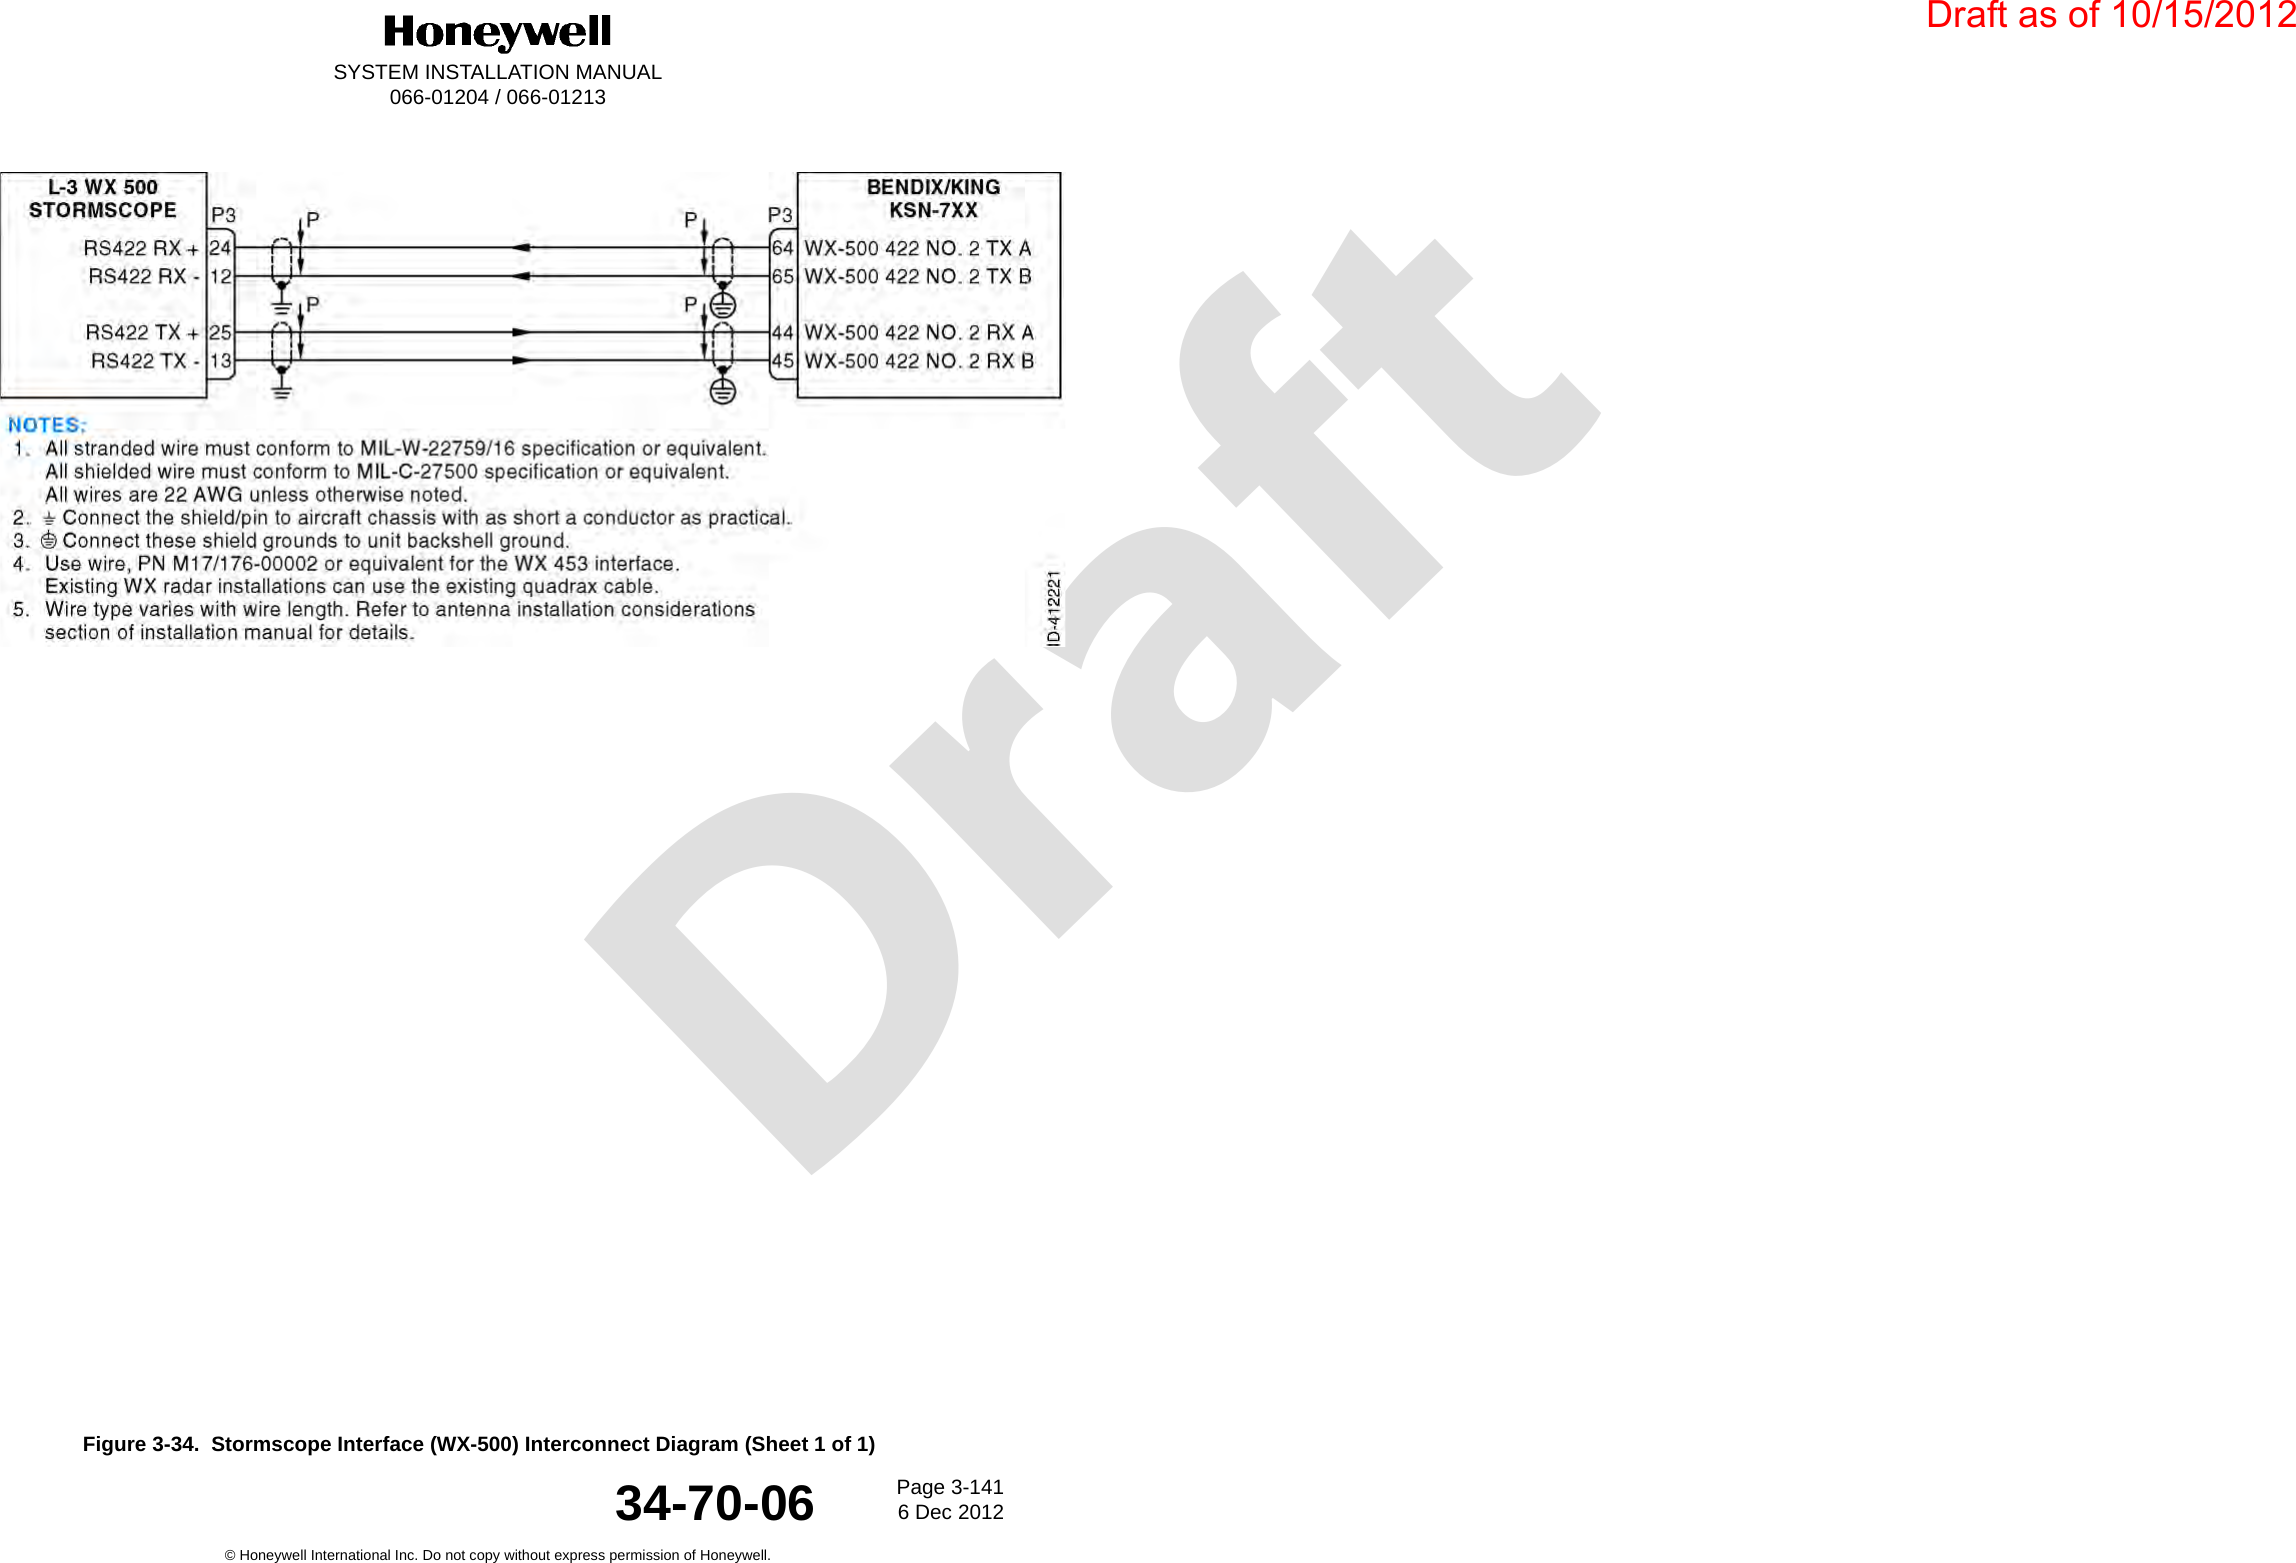 DraftSYSTEM INSTALLATION MANUAL066-01204 / 066-01213Page 3-1416 Dec 2012© Honeywell International Inc. Do not copy without express permission of Honeywell.34-70-06Figure 3-34.  Stormscope Interface (WX-500) Interconnect Diagram (Sheet 1 of 1)Draft as of 10/15/2012